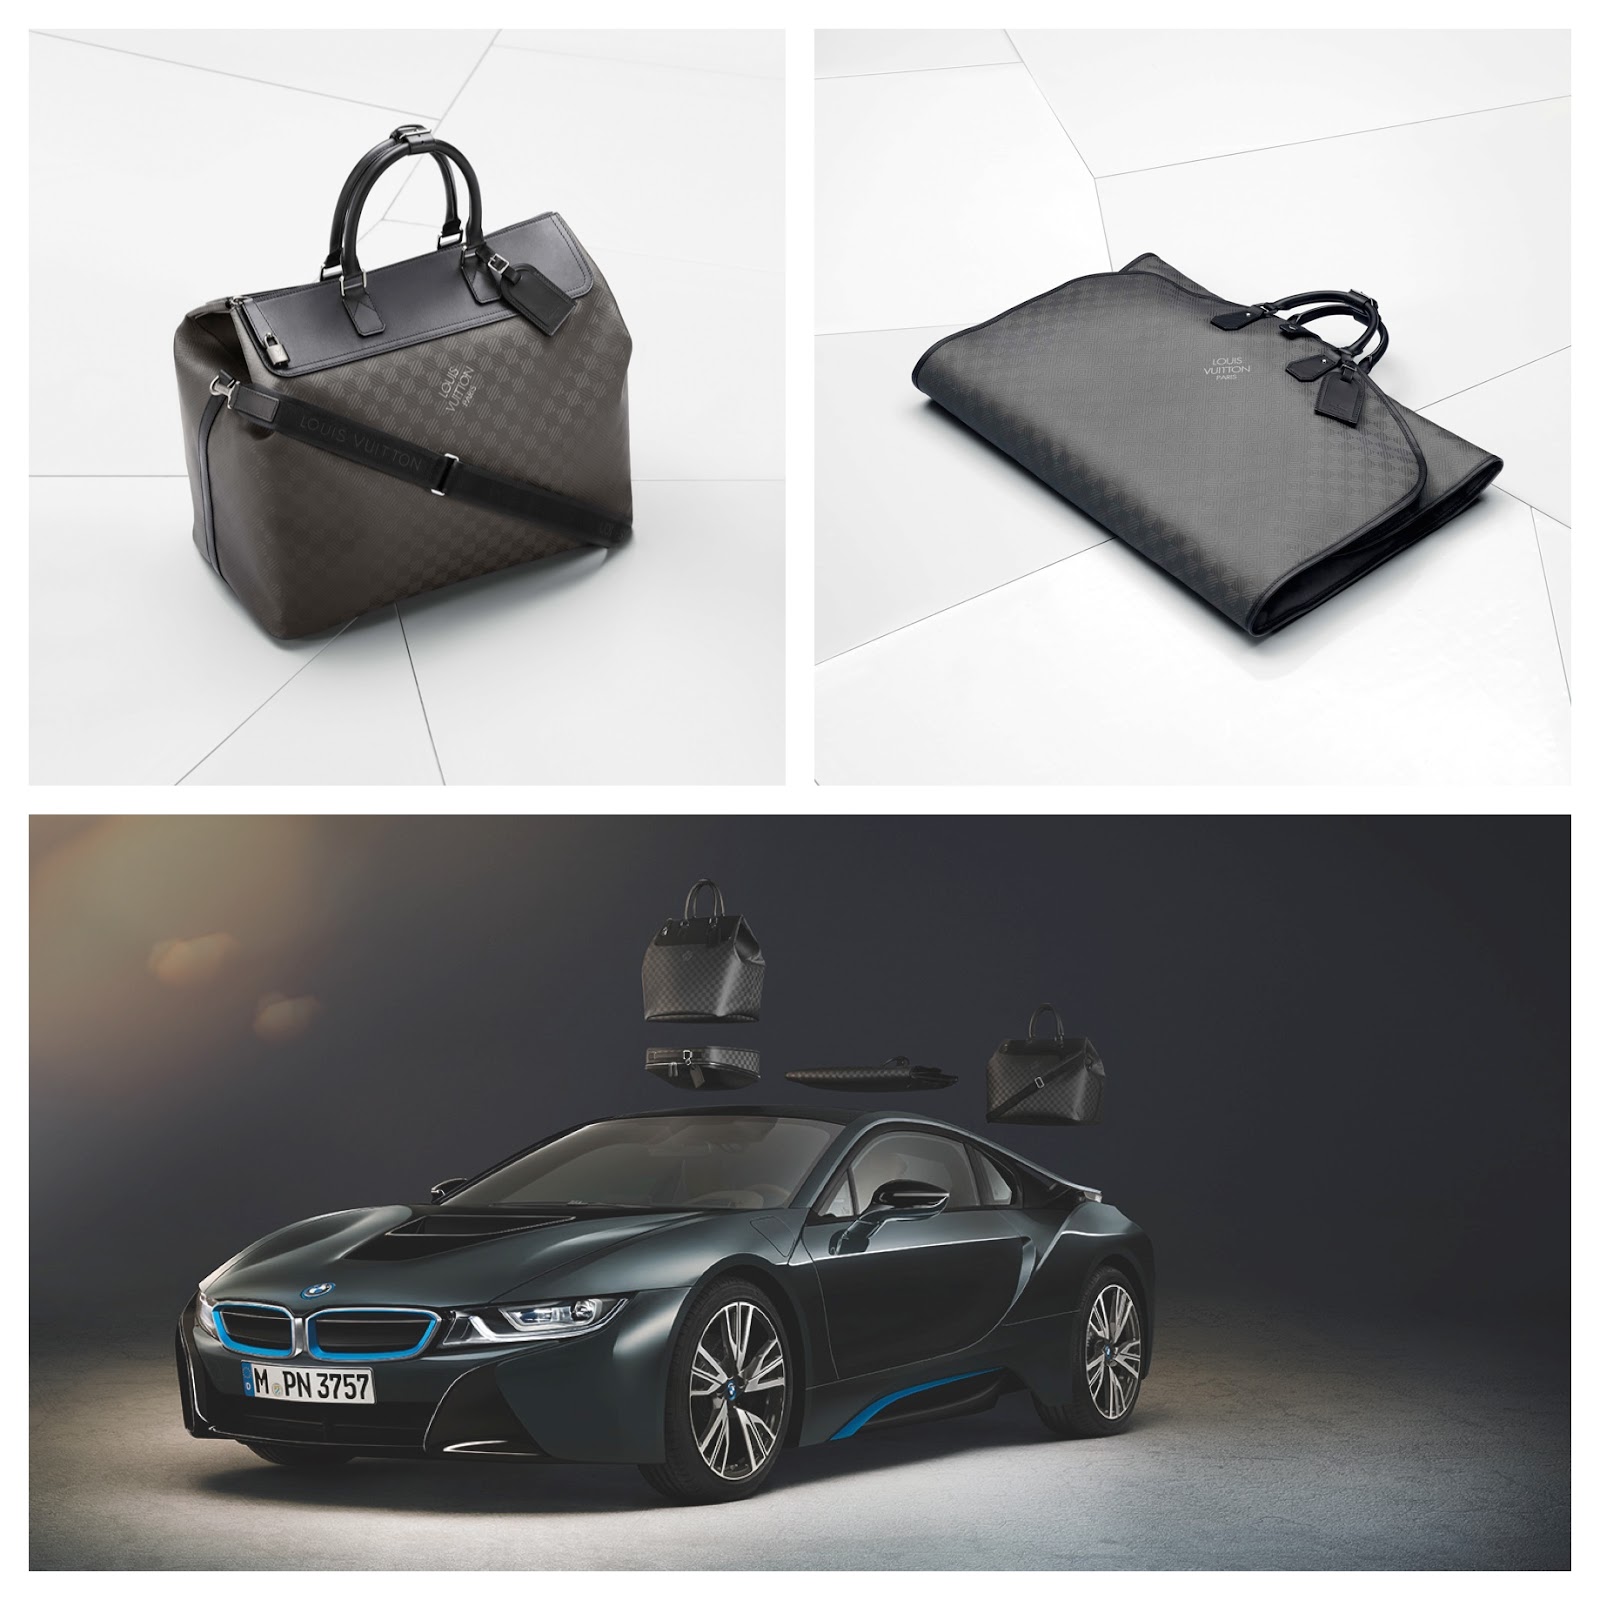 BMW used Louis Vuitton to sell more cars. here's how…, by Menan Sub